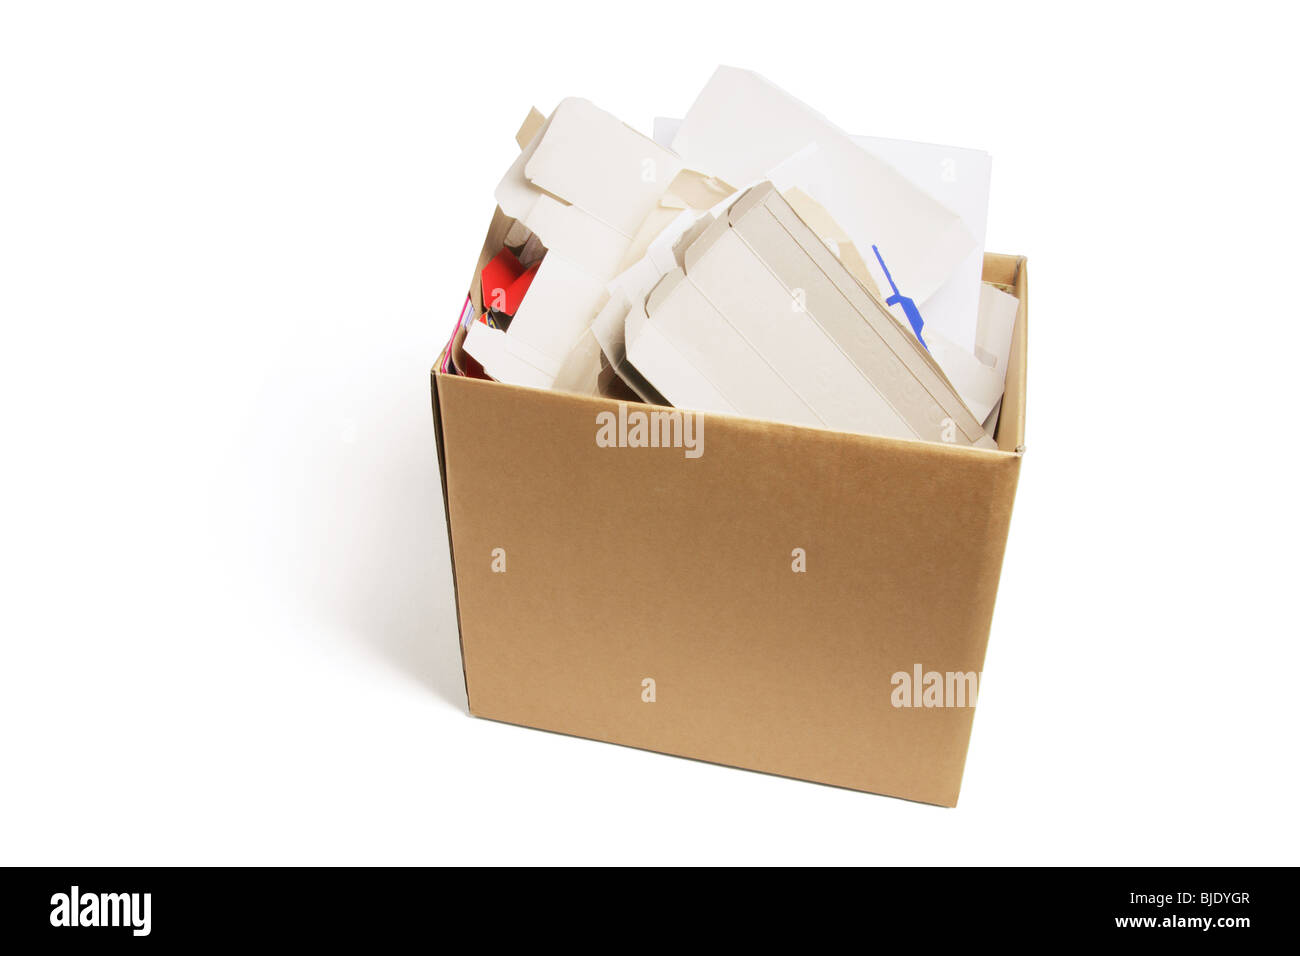 Waste Paper Products in Cardboard Box Stock Photo